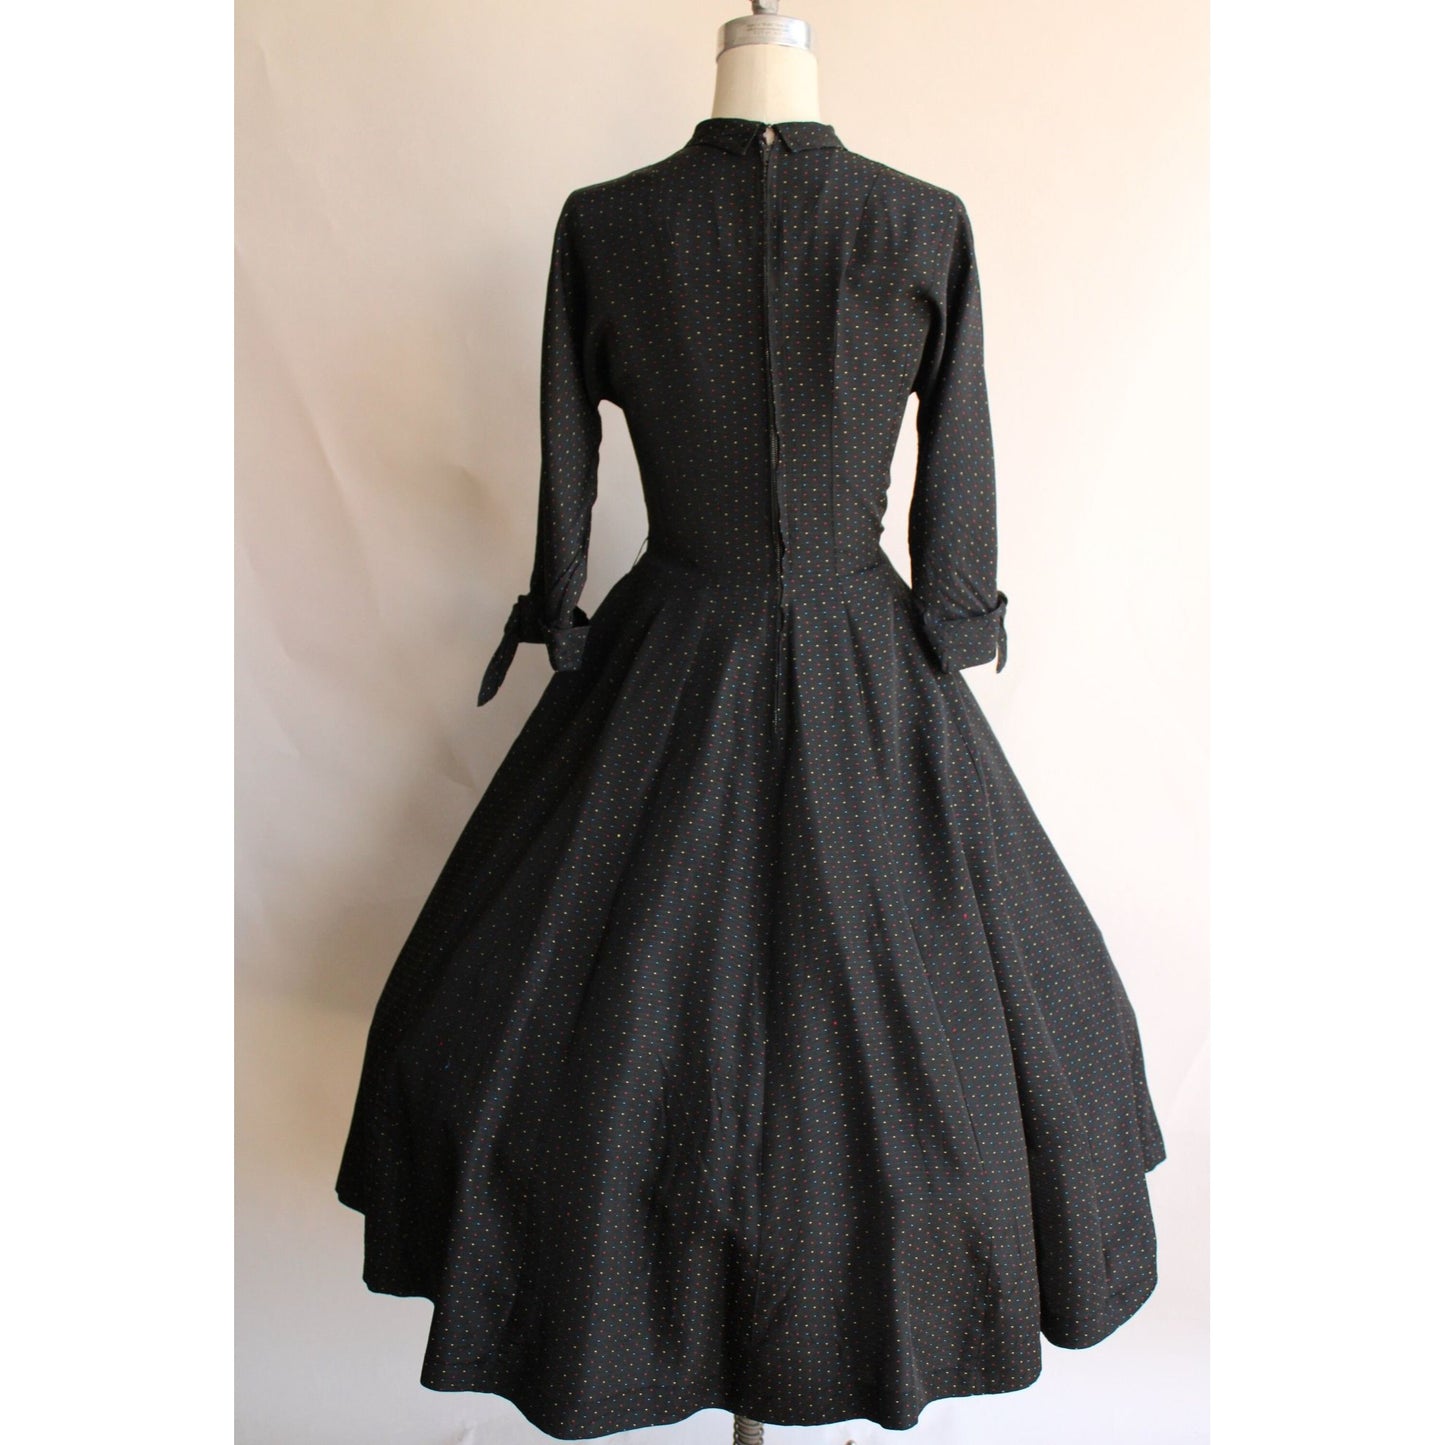 Vintage 1950s Black Taffeta Dress With Multicolor Dots and Velvet Lacing